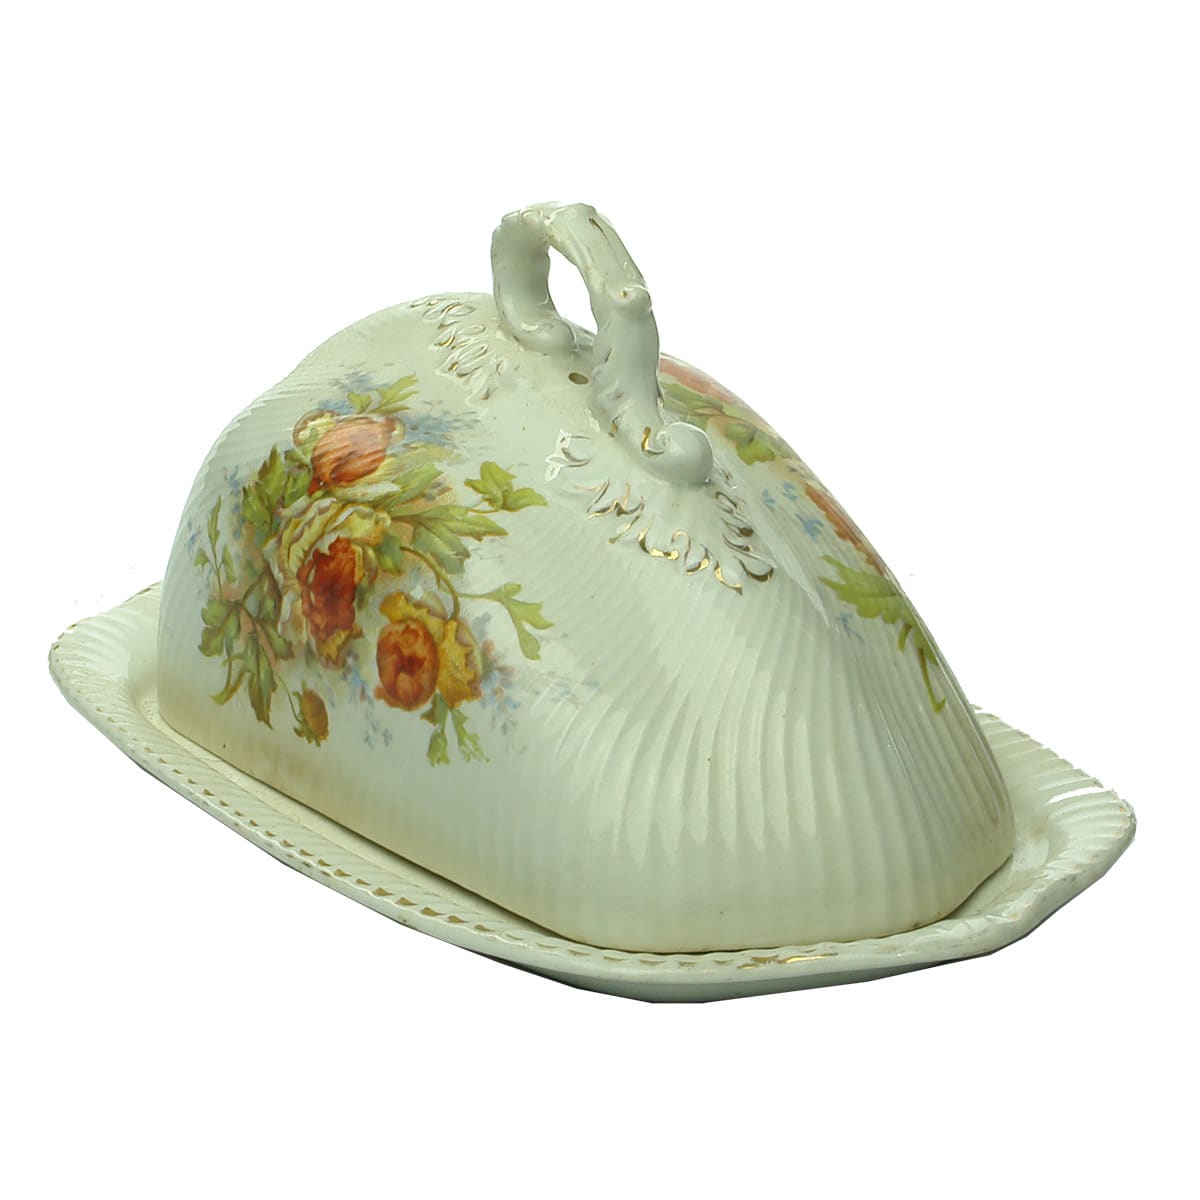 Cheese Dish. Small Dish with Floral Pattern and Registered Number.